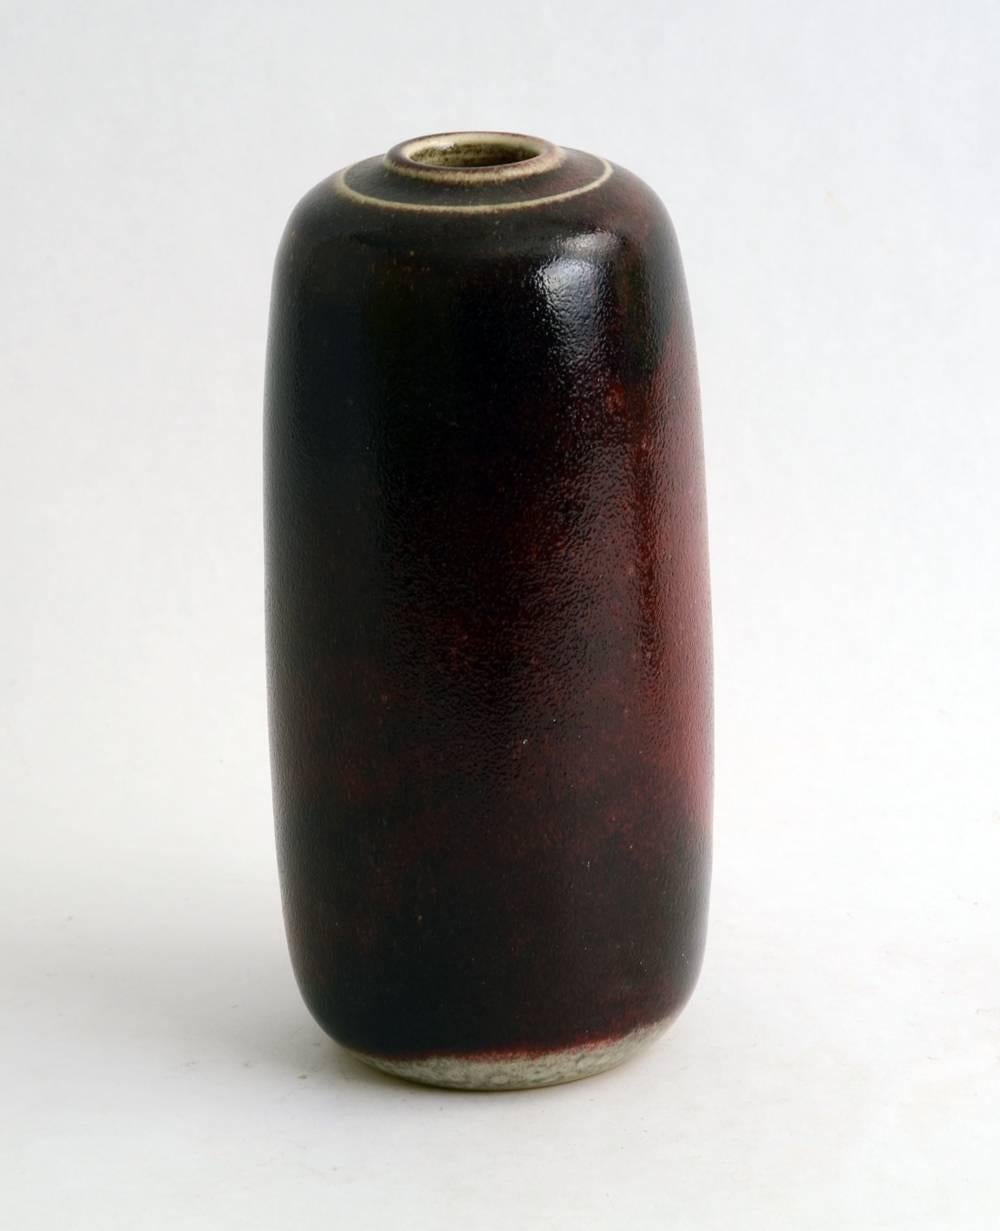 1. Unique stoneware vase with oxblood glaze.
Height 7" (18cm) Width 3 1/4" (8.5cm) No. N8356.

2. Stoneware vase with glossy oxblood glaze.
Height 8 3/4" (22.5cm) Width 5" (13cm) No. A2161.

3. Stoneware vase with glossy